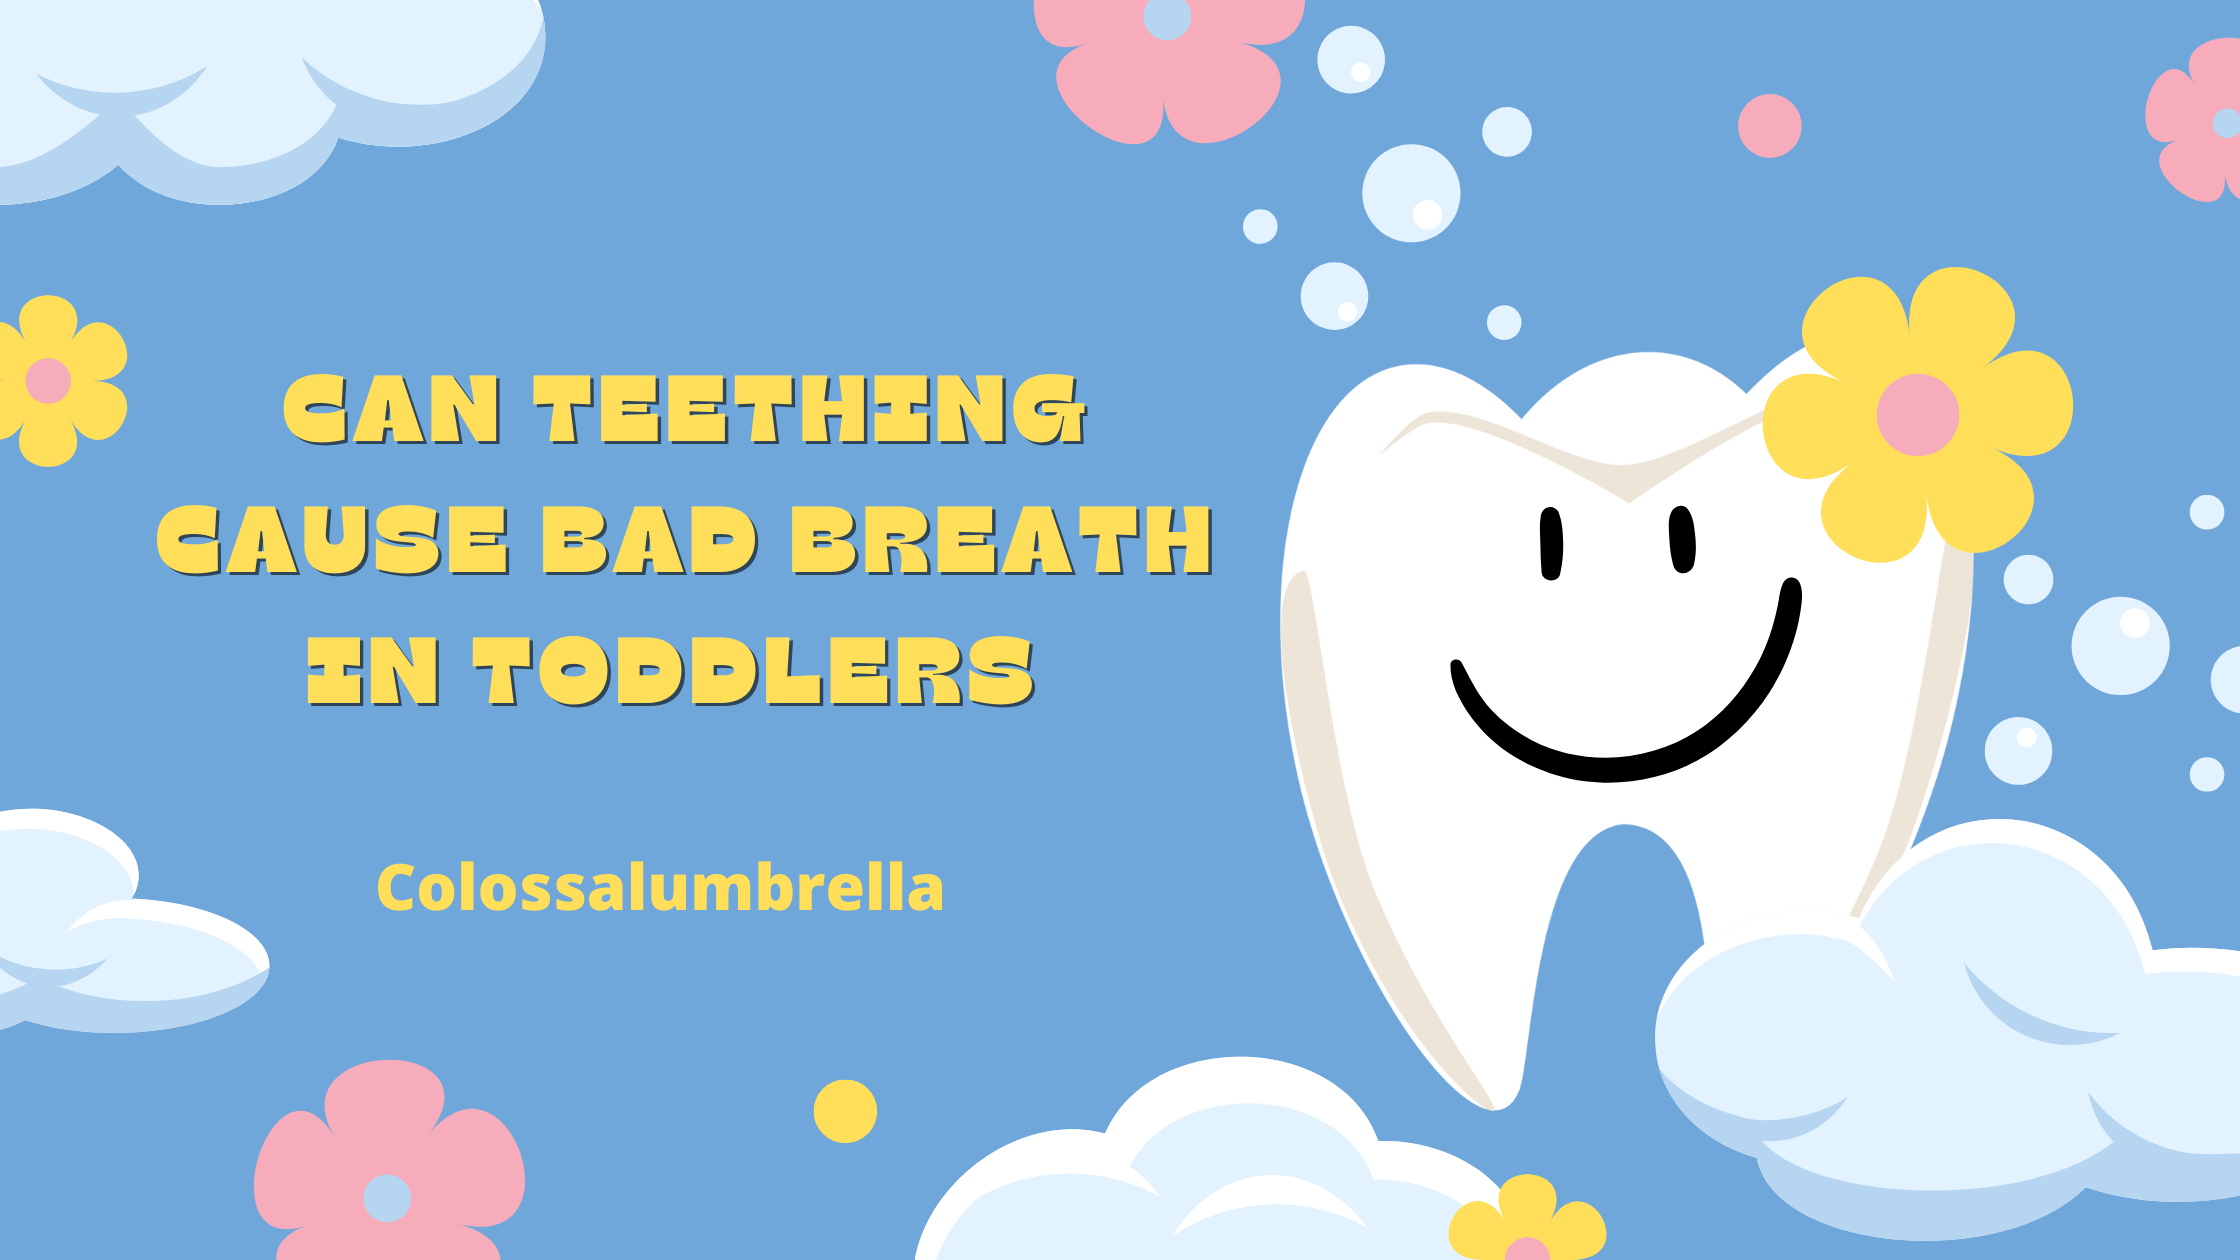 Can teething cause bad breath in toddlers